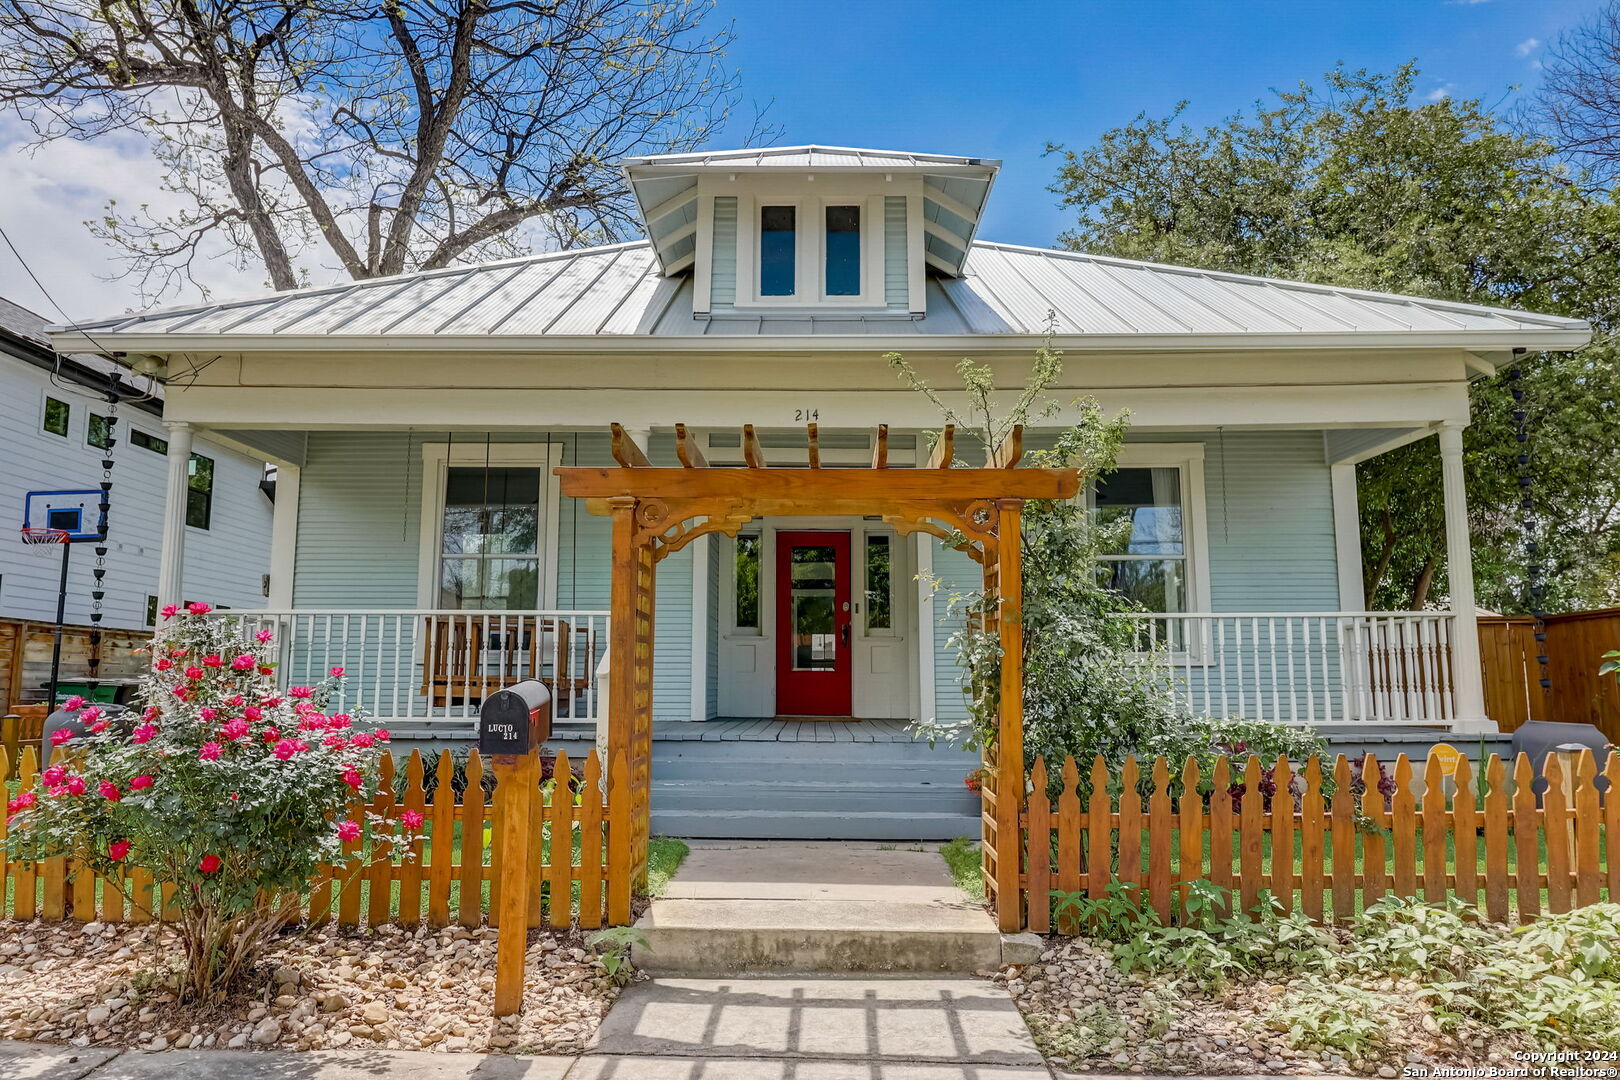 Relax with coffee and a book on the oversized front porch swing overlooking a charming rose garden. This beautiful single family home is conveniently located in the Southtown Arts District. Charming kitchen with natural light, original long - leaf pine hardwood floors. Tastefully updated not compromising the original character. Perfectly located a few blocks from Blue Star and the San Antonio River. Located a block away from trails connecting the San Pedro Creek. Easy access to the Mission Reach hike and bike trails, less than a mile to the nearest Grocery Store.  A 5 minute bike ride to HemisFair and the downtown business district.